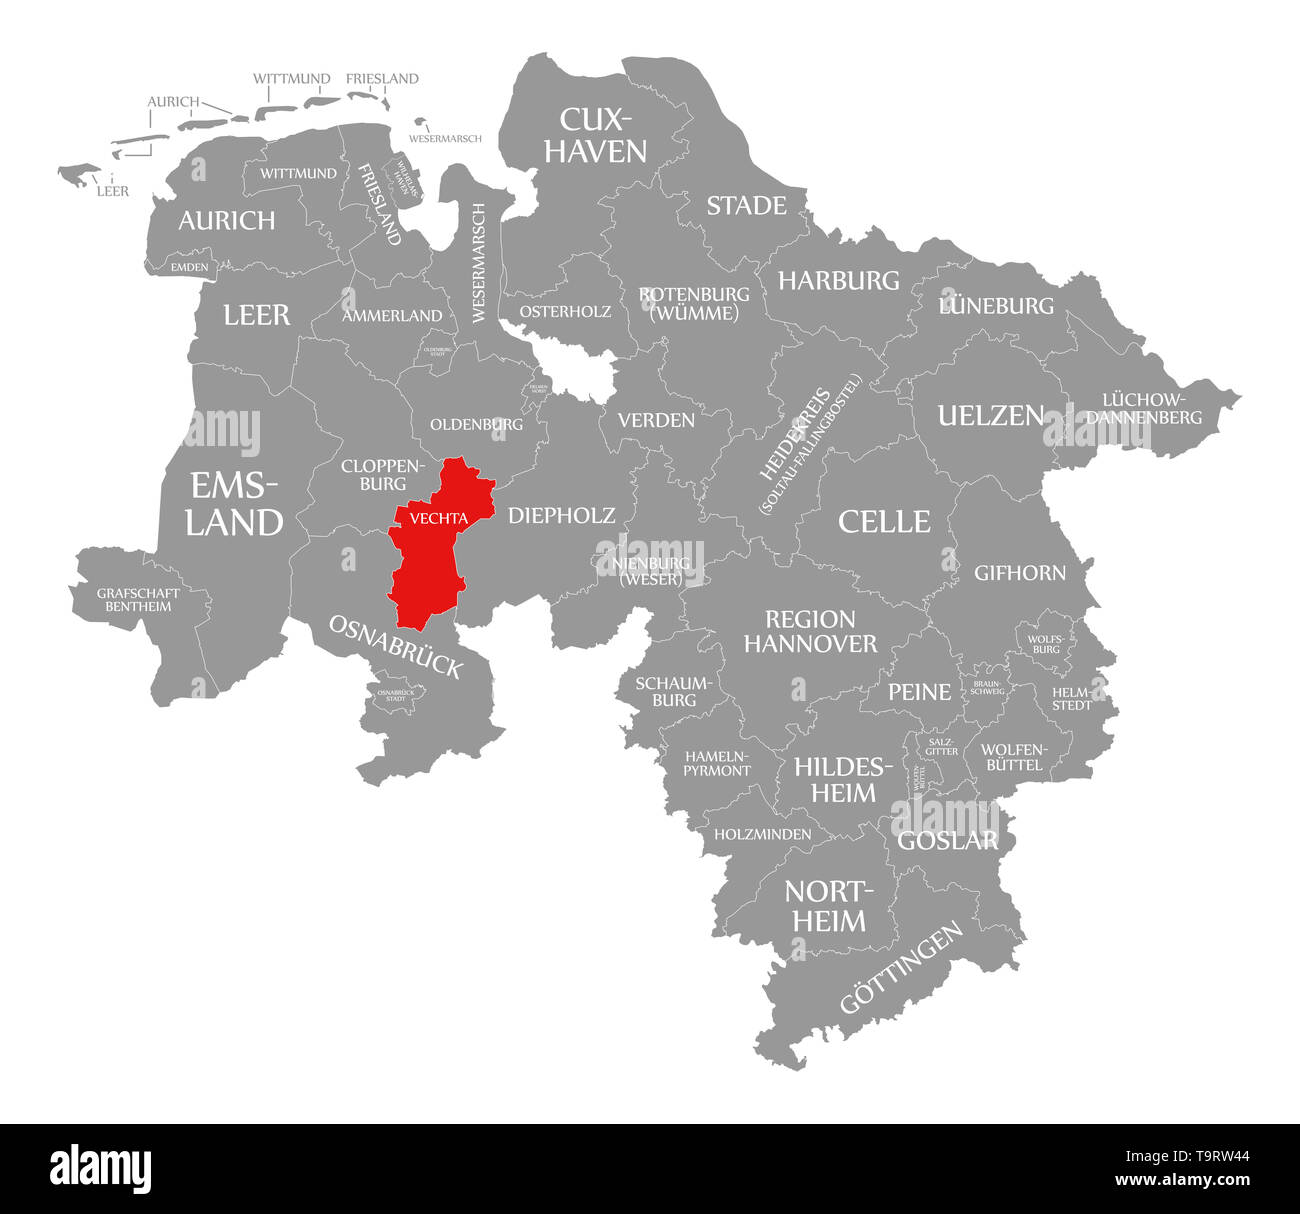 Vechta county red highlighted in map of Lower Saxony Germany Stock Photo